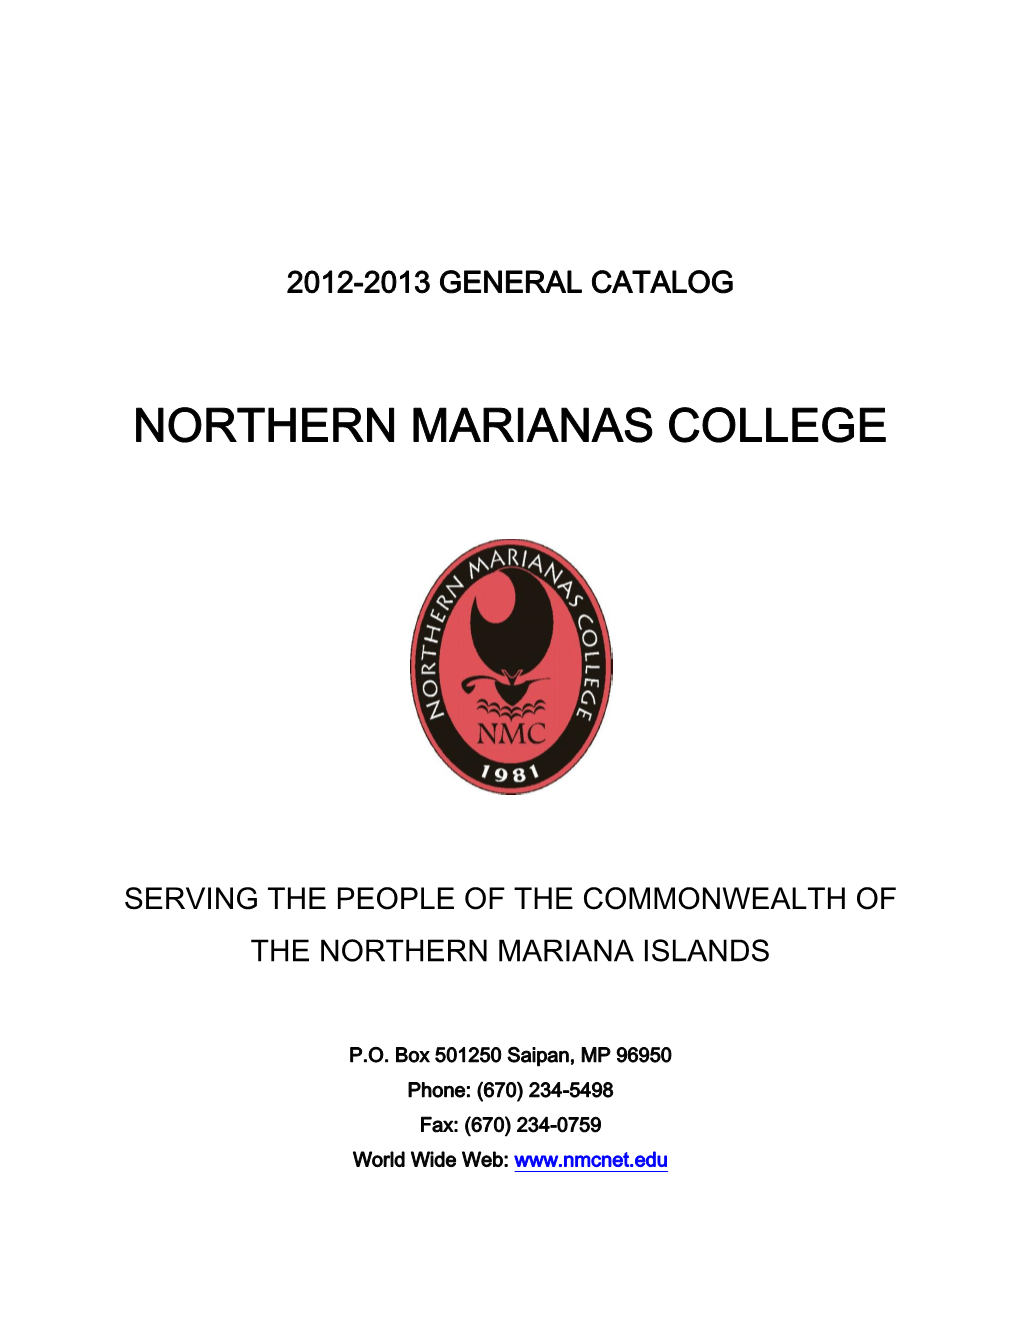 Northern Marianas College Catalog Message from the NMC President